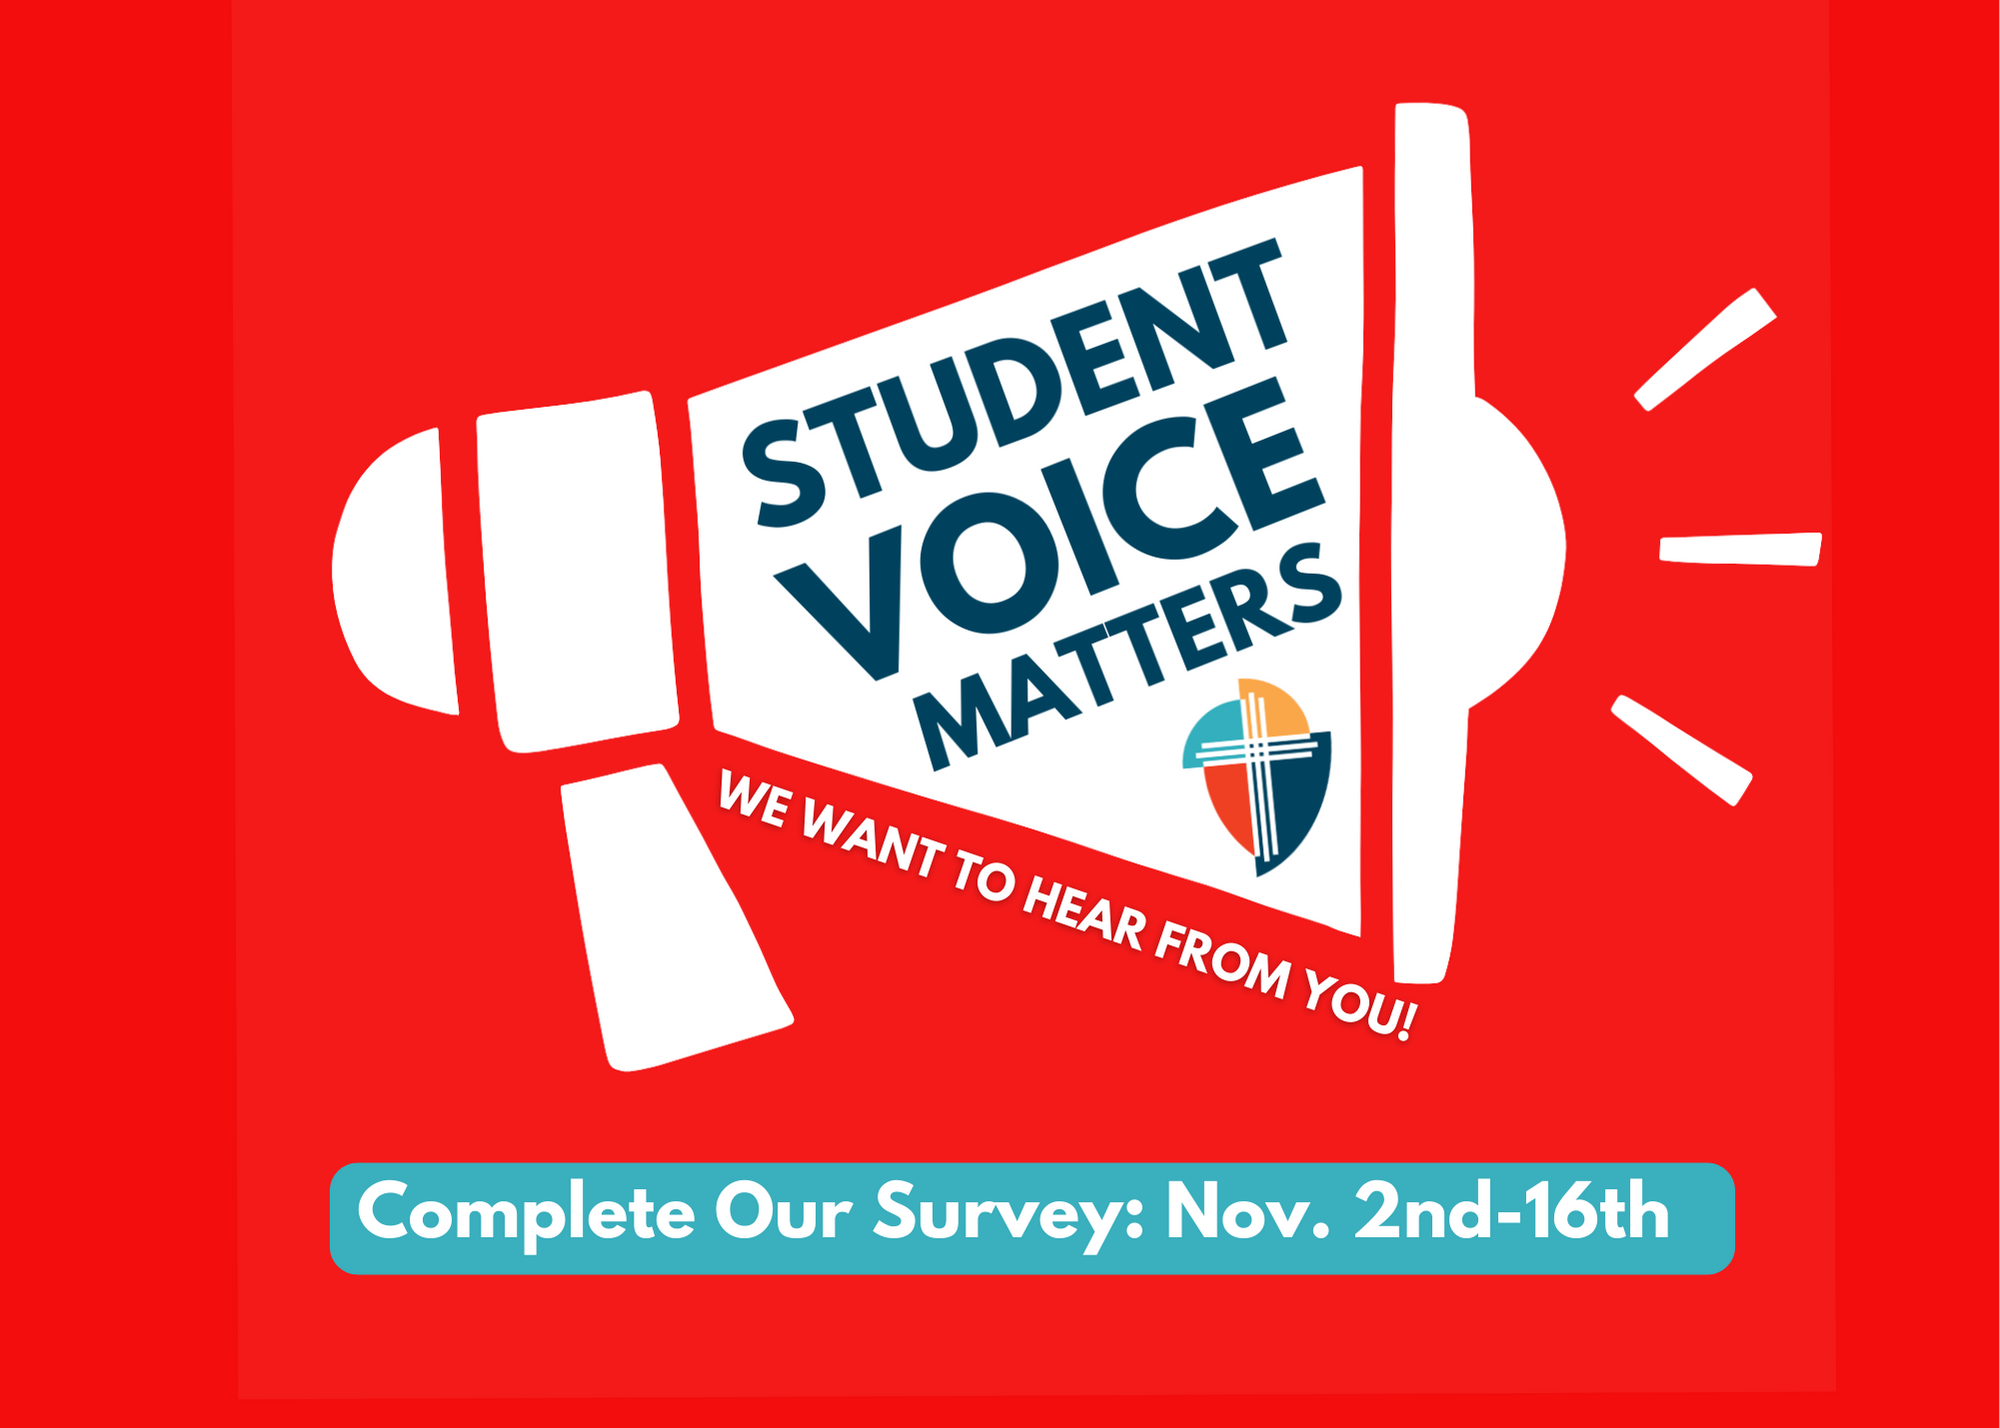 Student Voice Matters: We Want to Hear From You